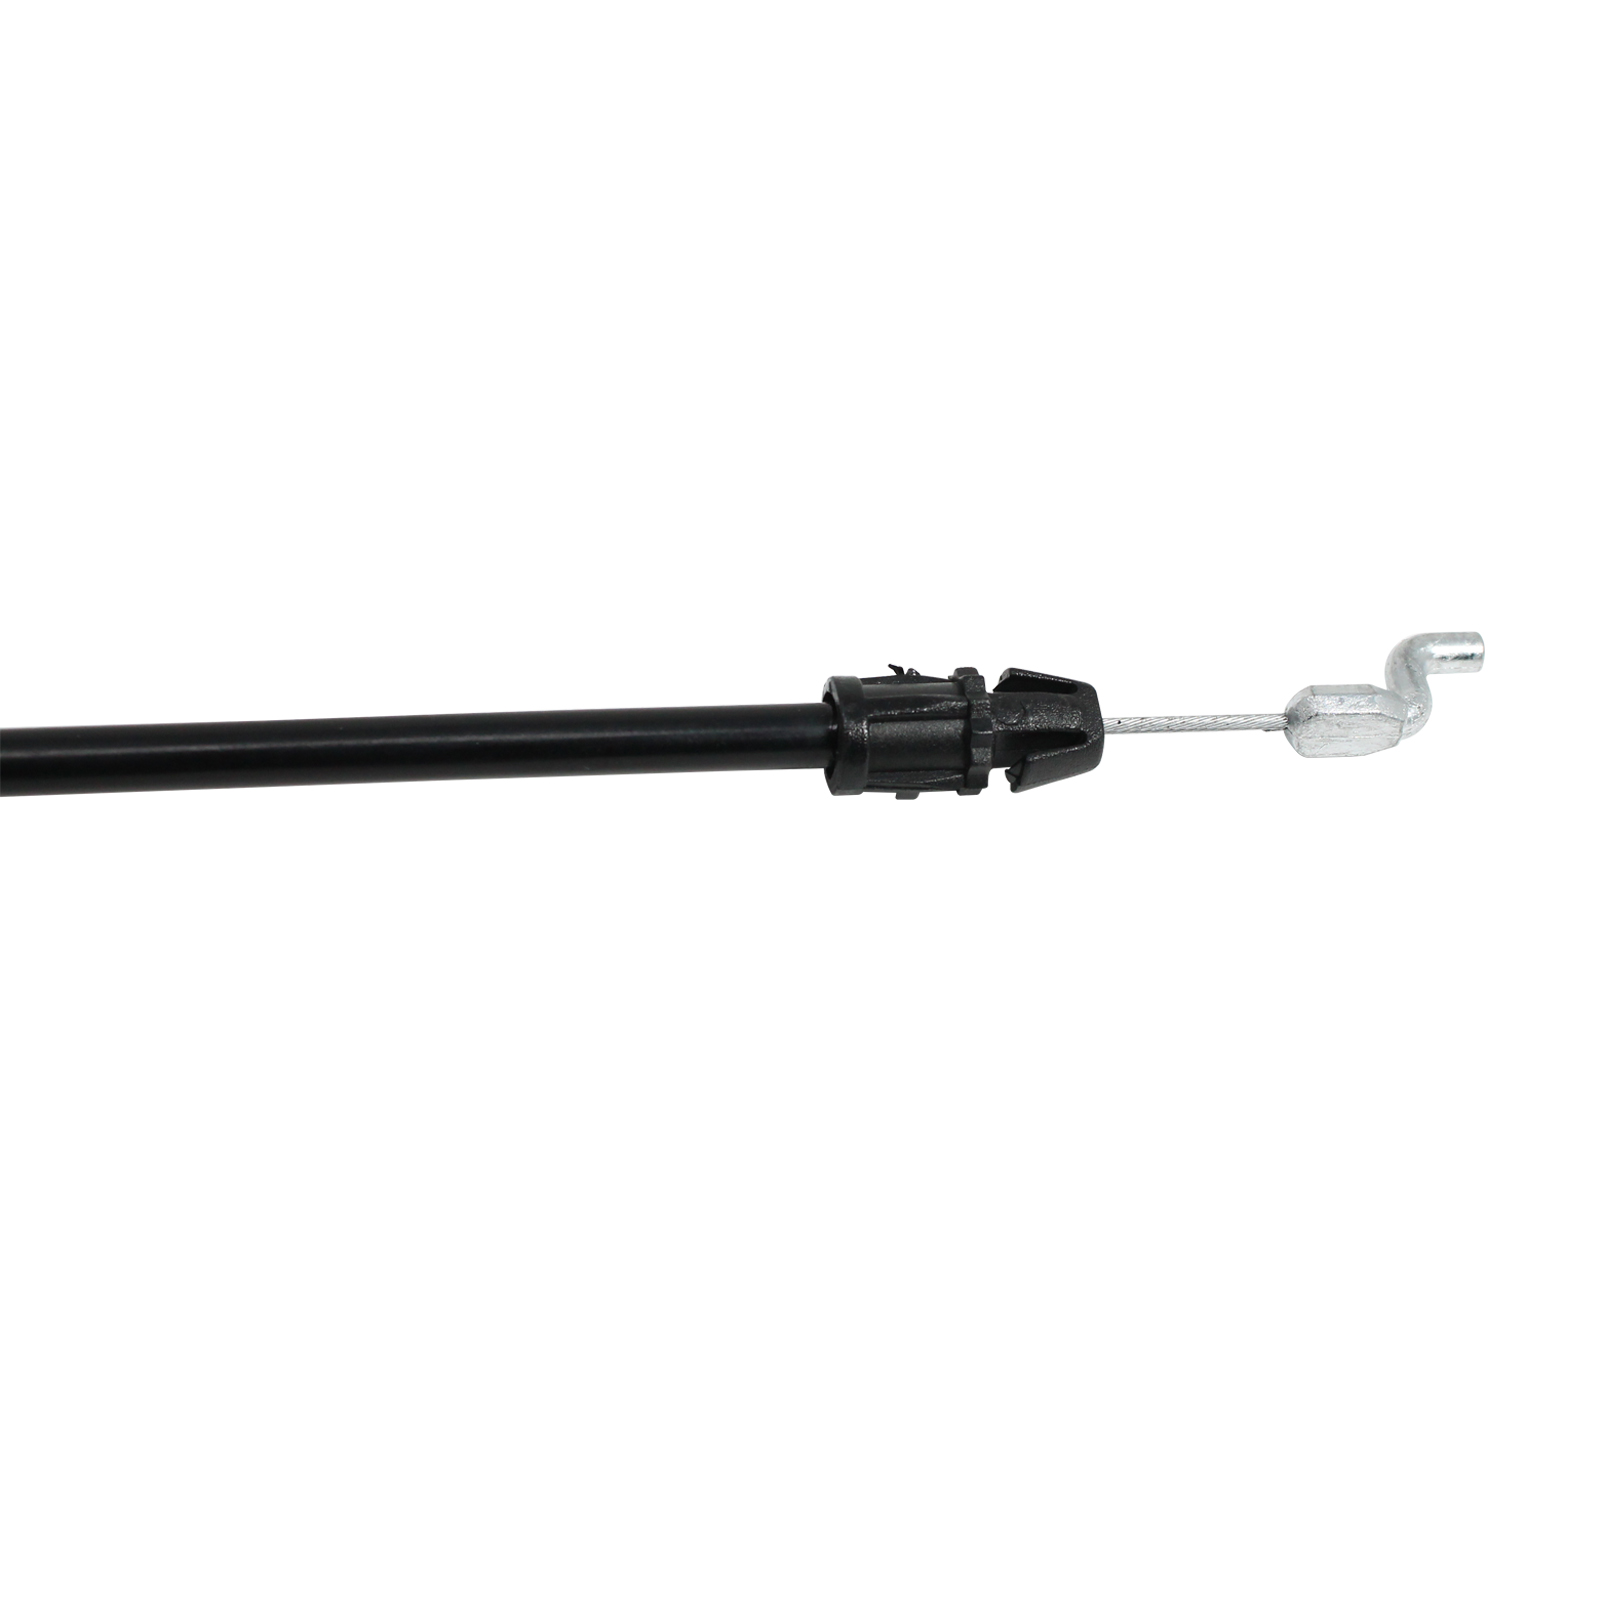 2-Pack 532176556 Engine Cable Replacement for Husqvarna ROTARY LAWN MOWER (96114000701) (2007-01) Lawn Mower: Consumer Walk Behind - Compatible with 176556 162778 Zone Control Cable - image 3 of 4